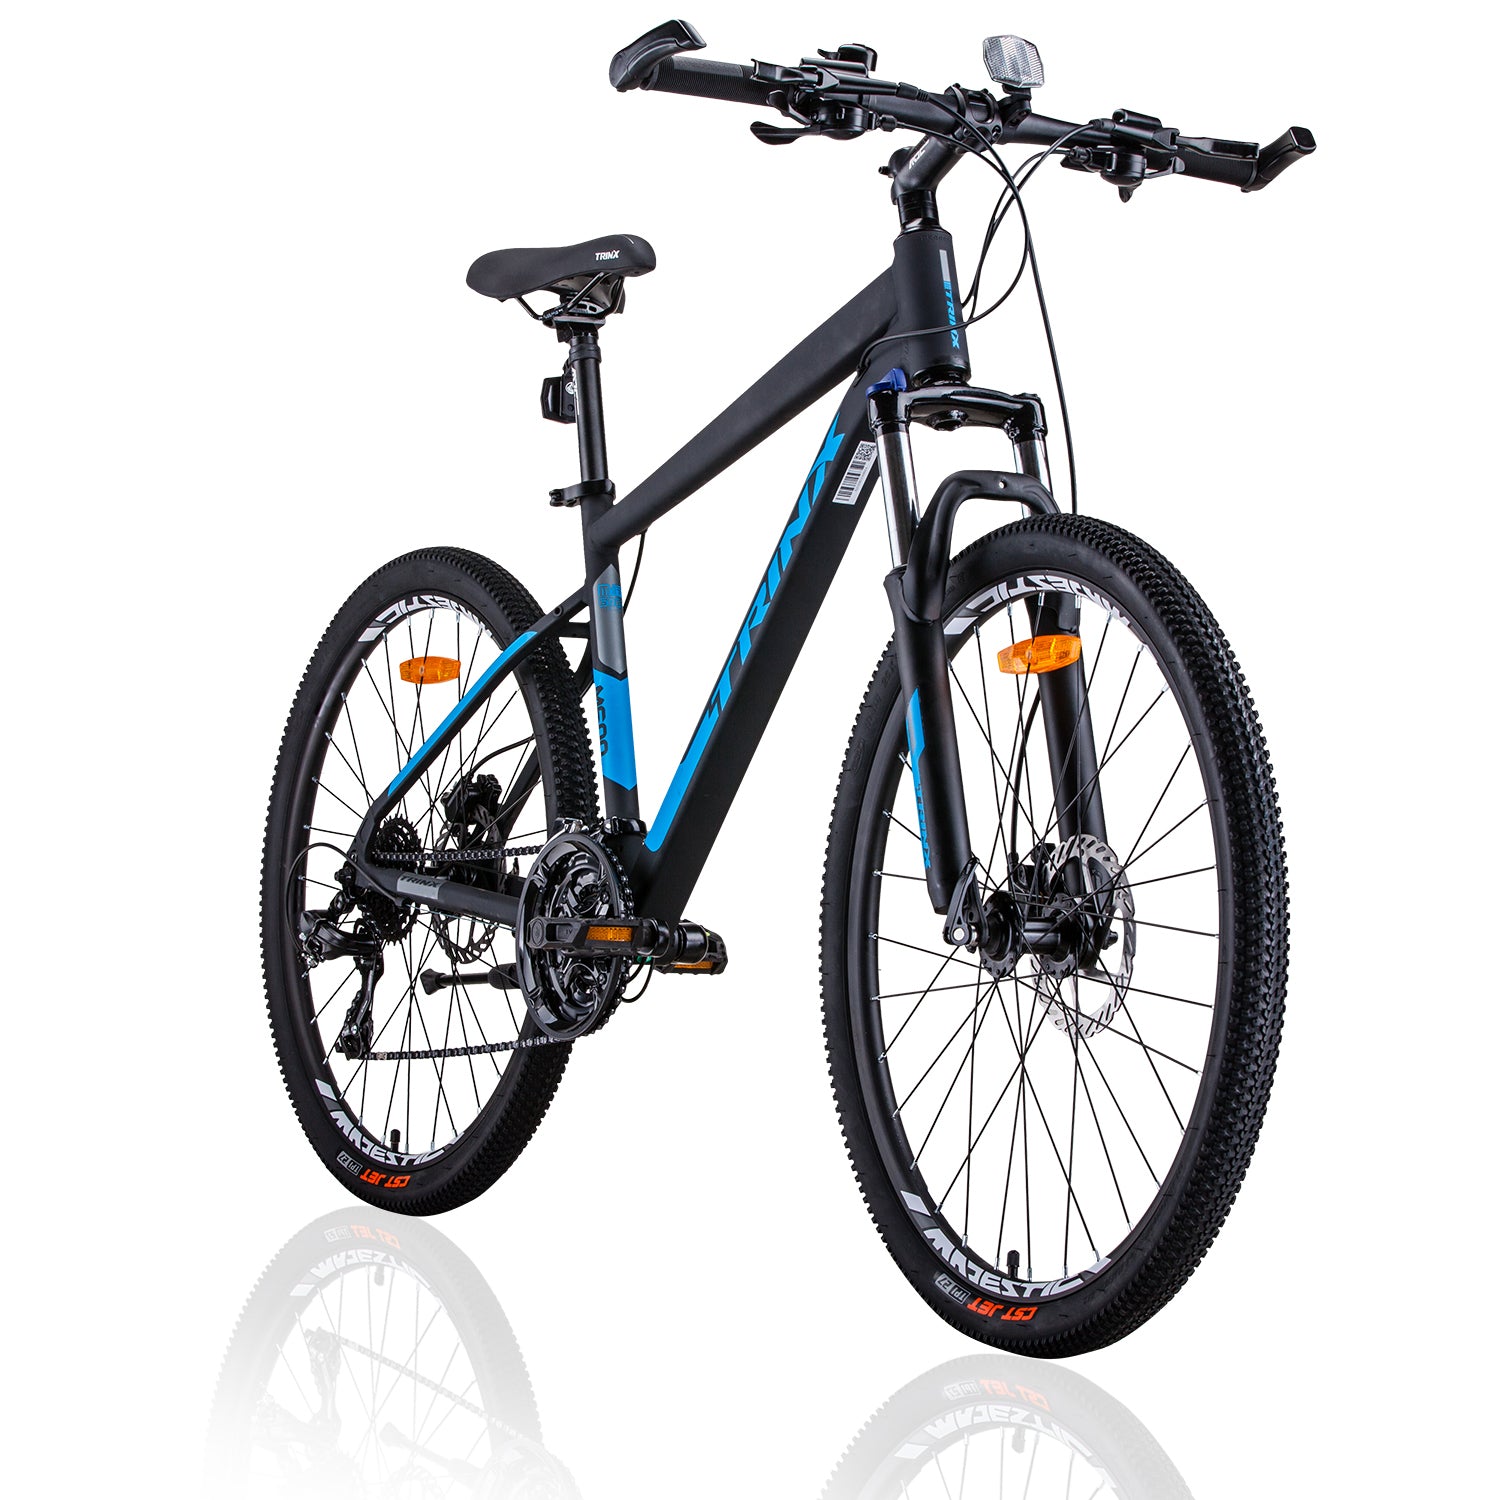 Trinx M600 Mountain Bike 24 Speed MTB Bicycle 21 Inches Frame Blue